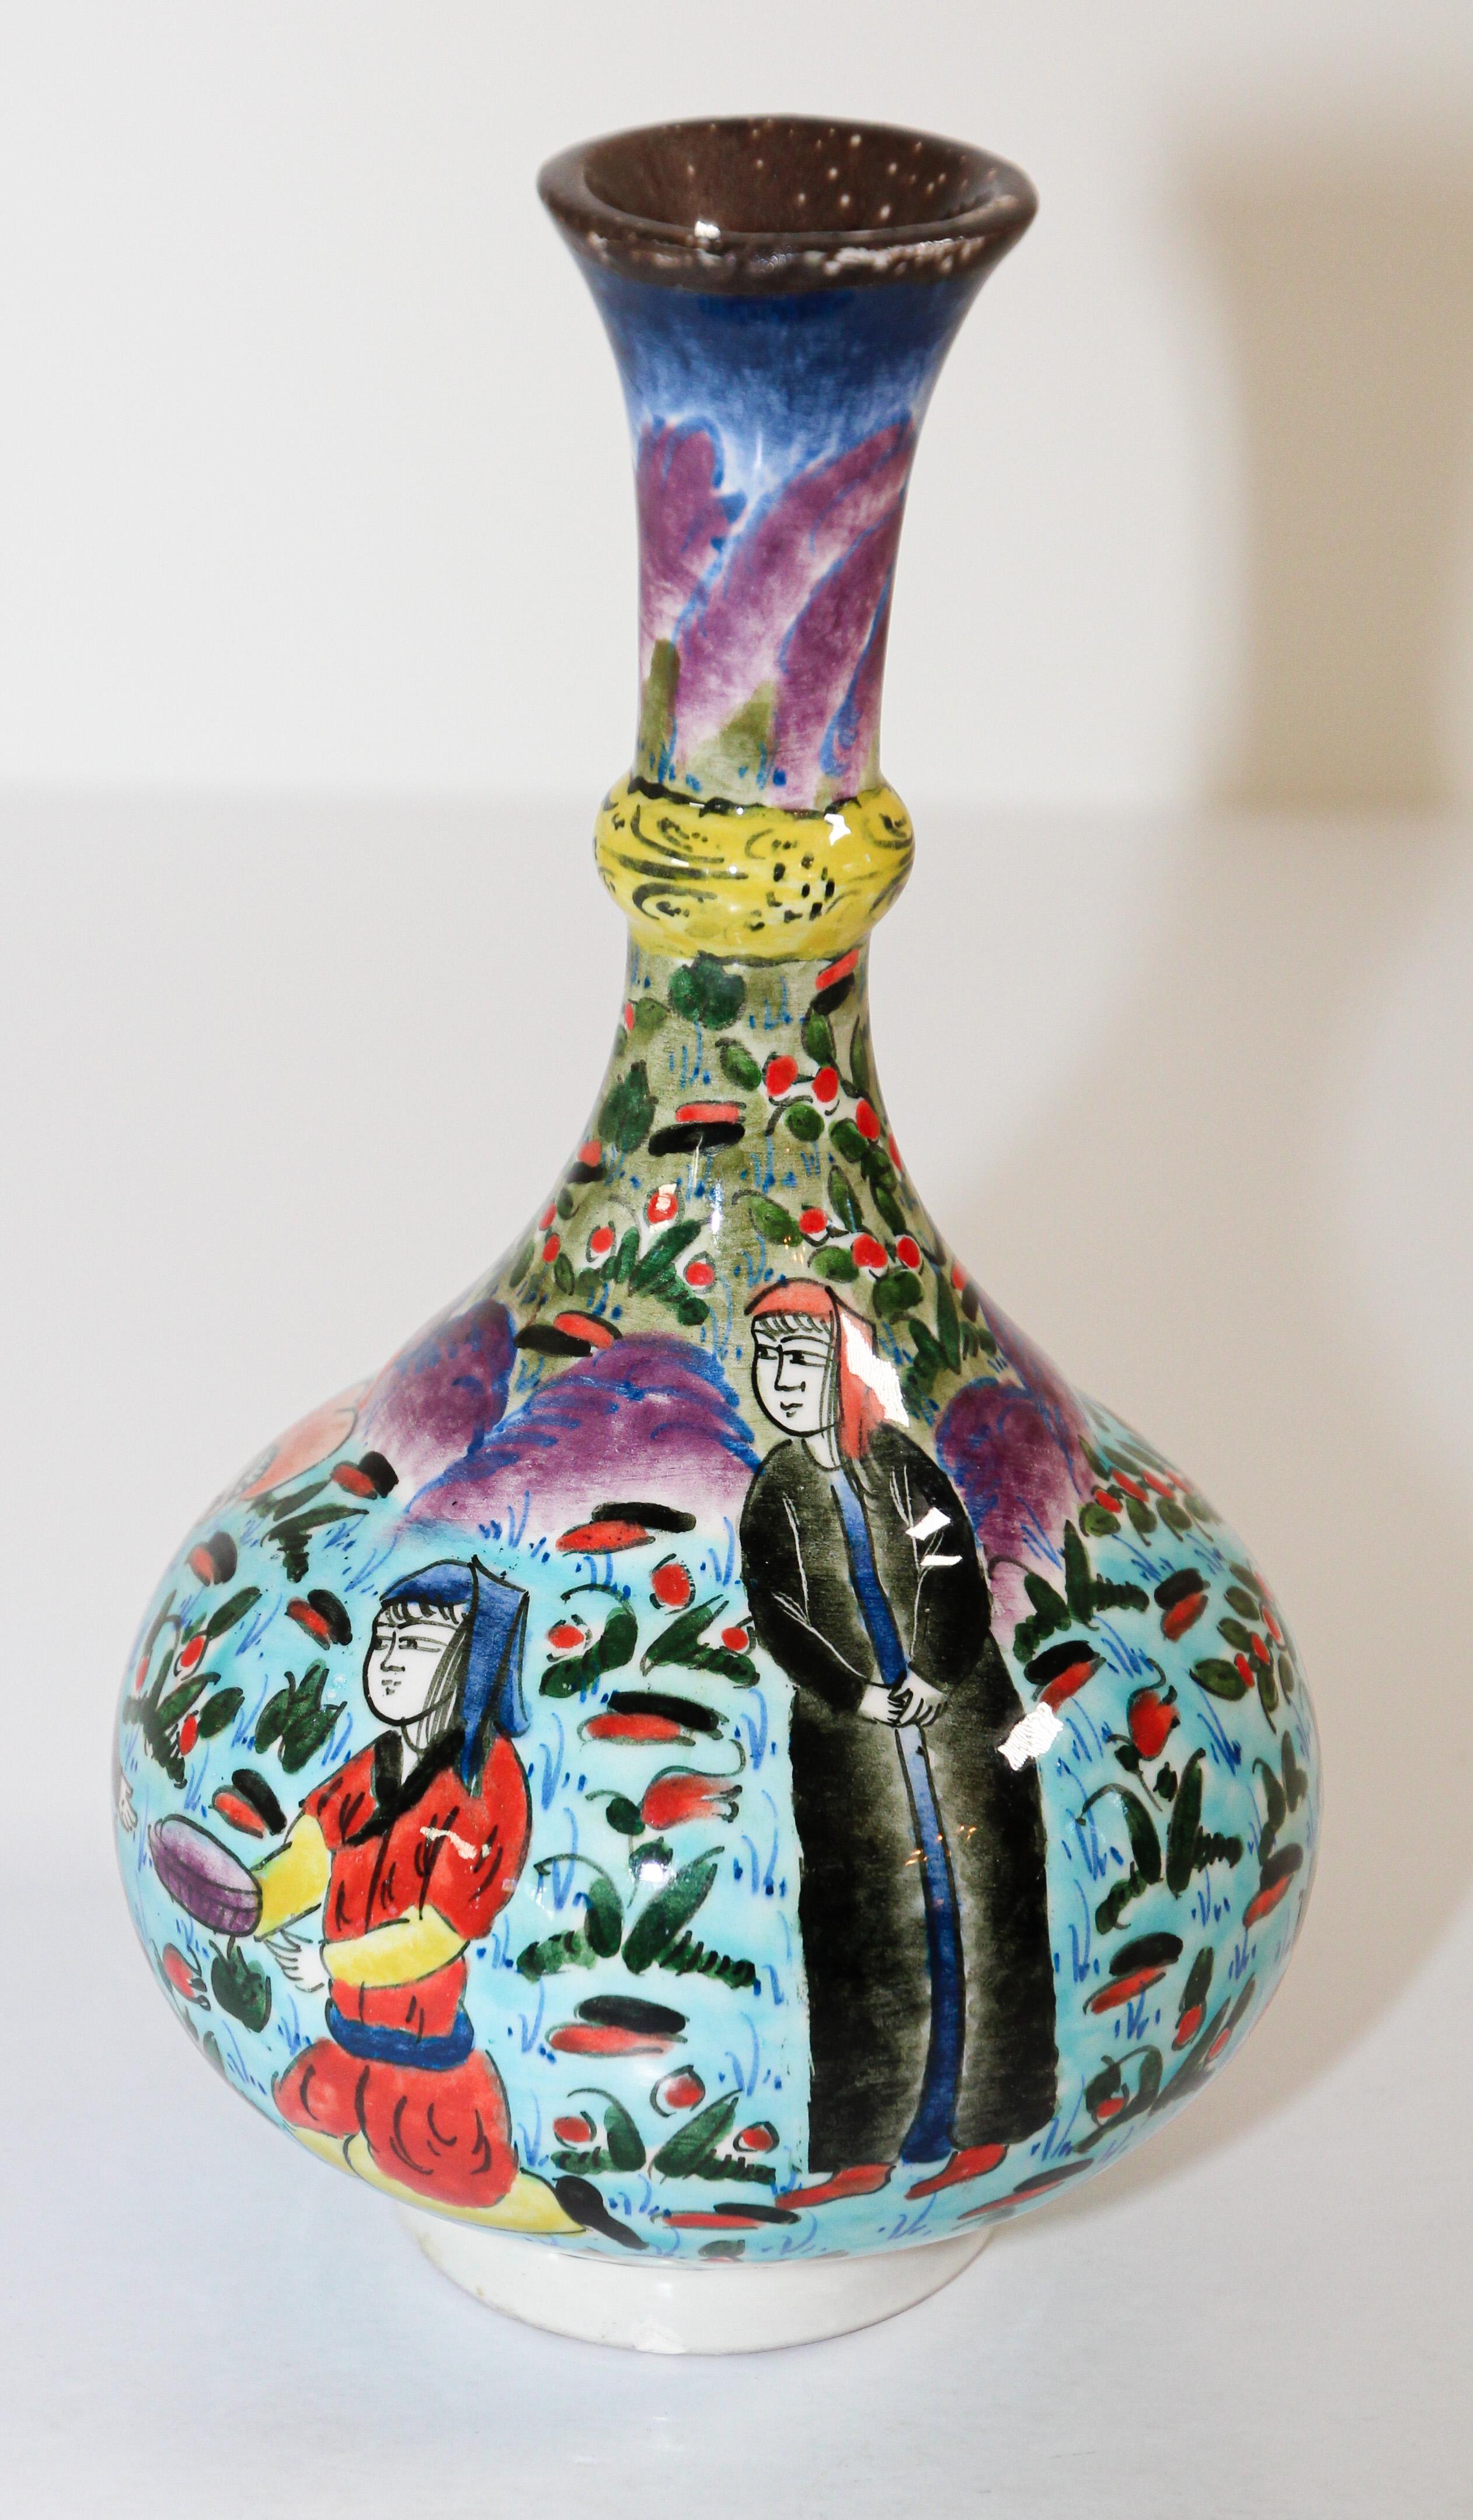 A small Kütahya style polychrome hand painted and handcrafted glazed ceramic decorative vase with an Ottoman scene.
This is an intricately, hand painted vase that was made in Marmara, Turkey:
Kütahya is famous for its kiln products, such as tiles